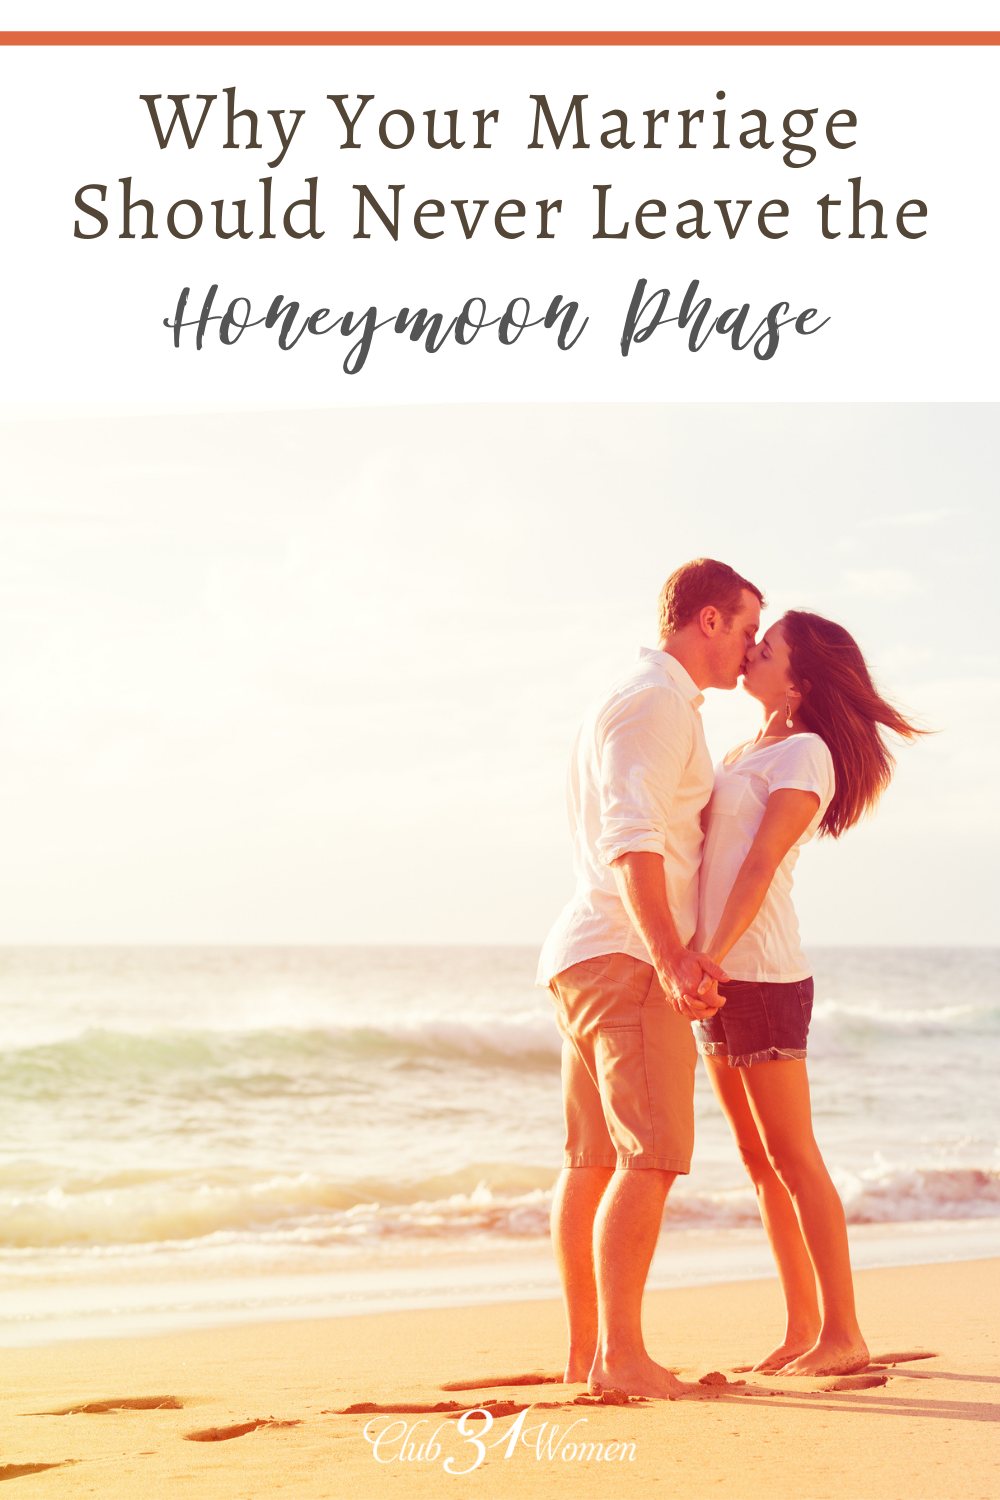 Why Your Marriage Should Never Leave The Honeymoon Phase Club31women